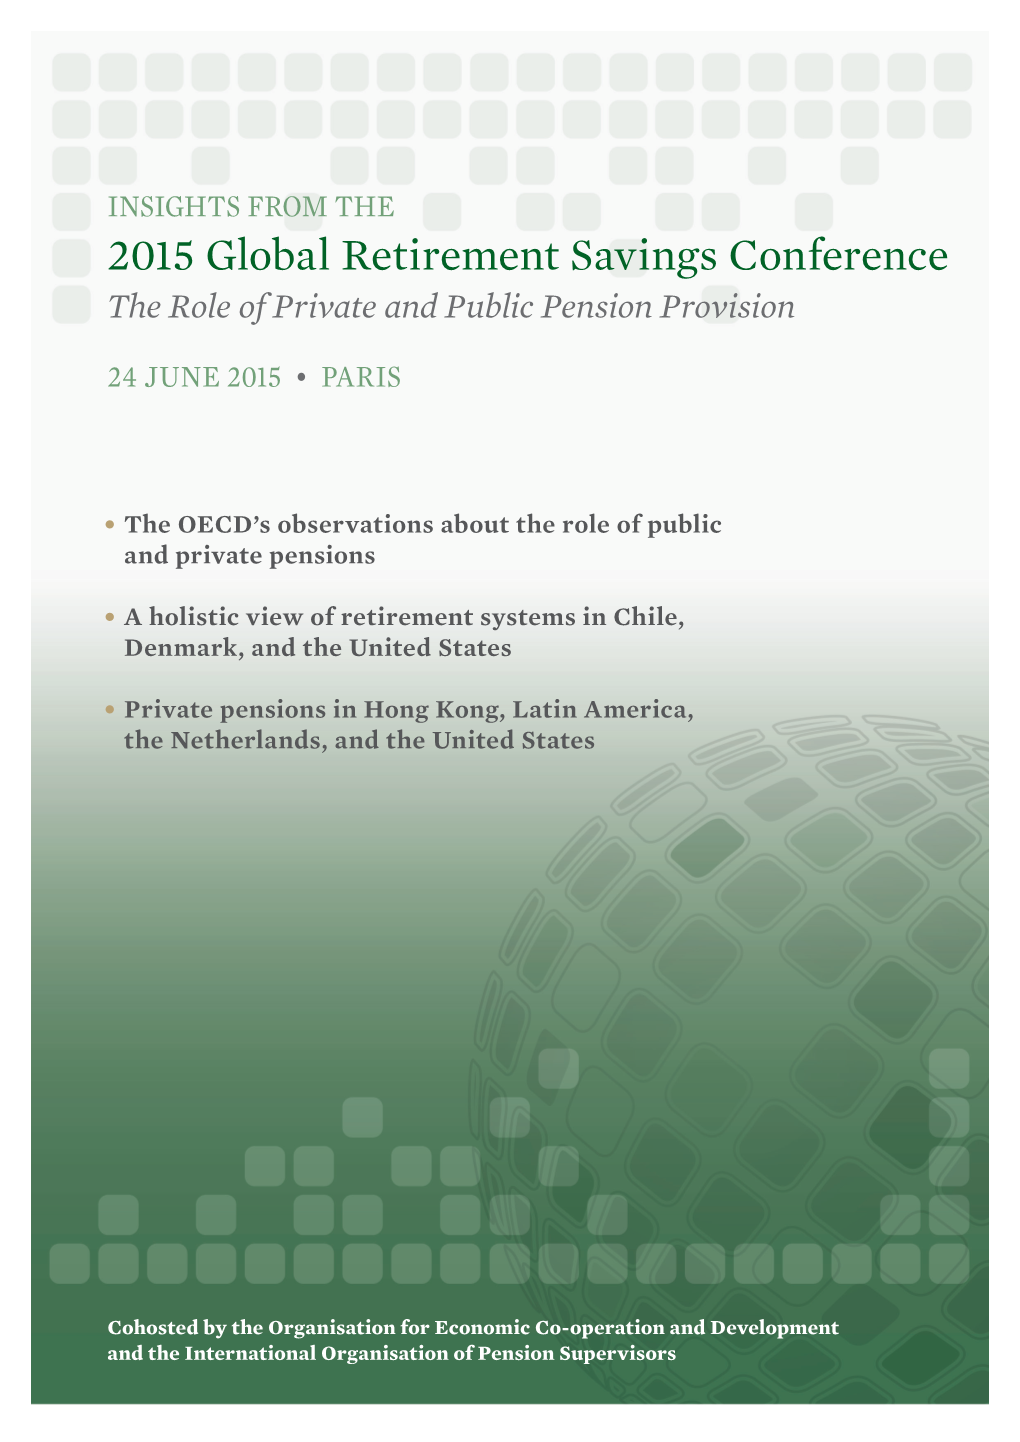 INSIGHTS from the 2015 Global Retirement Savings Conference the Role of Private and Public Pension Provision